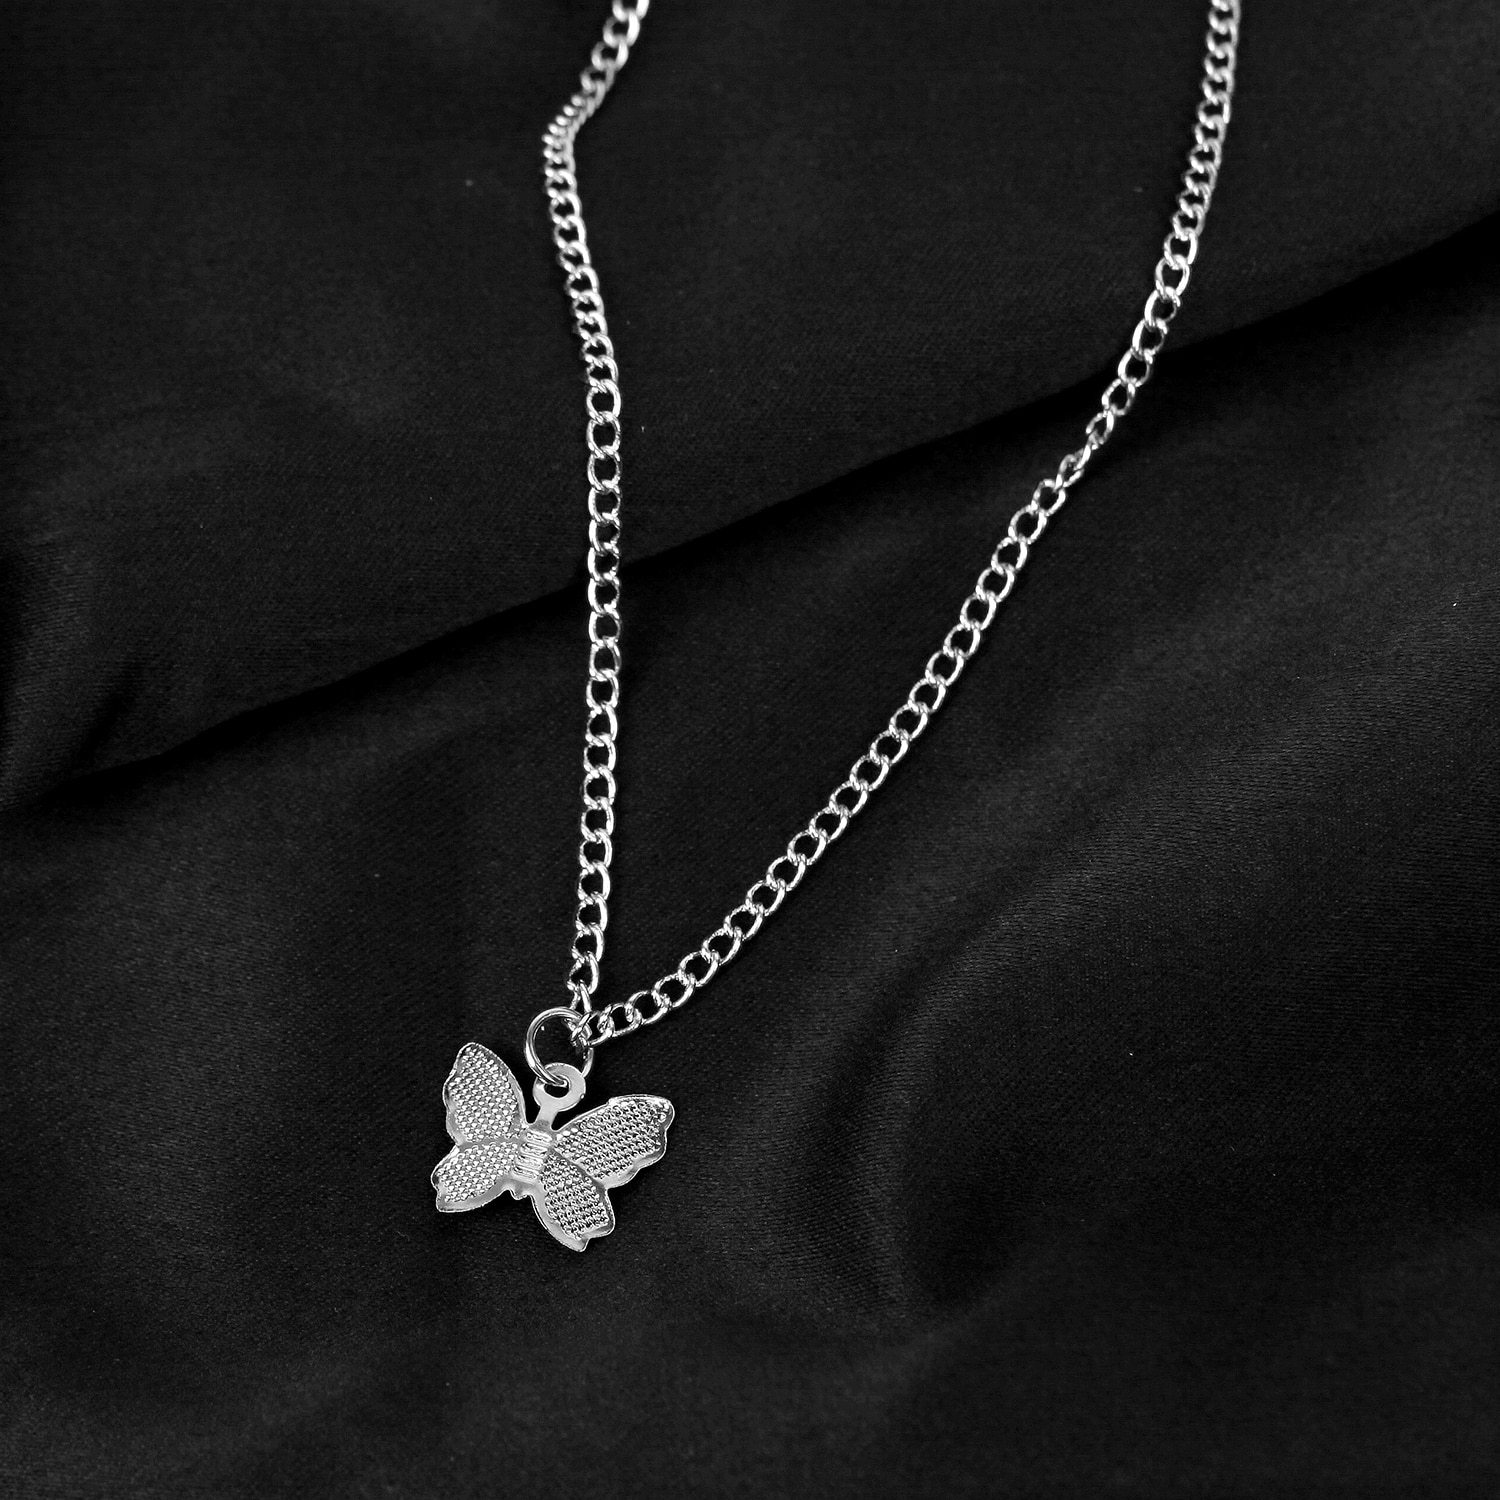 A Gold Chain Butterfly Pendant Choker for Women on a black background.